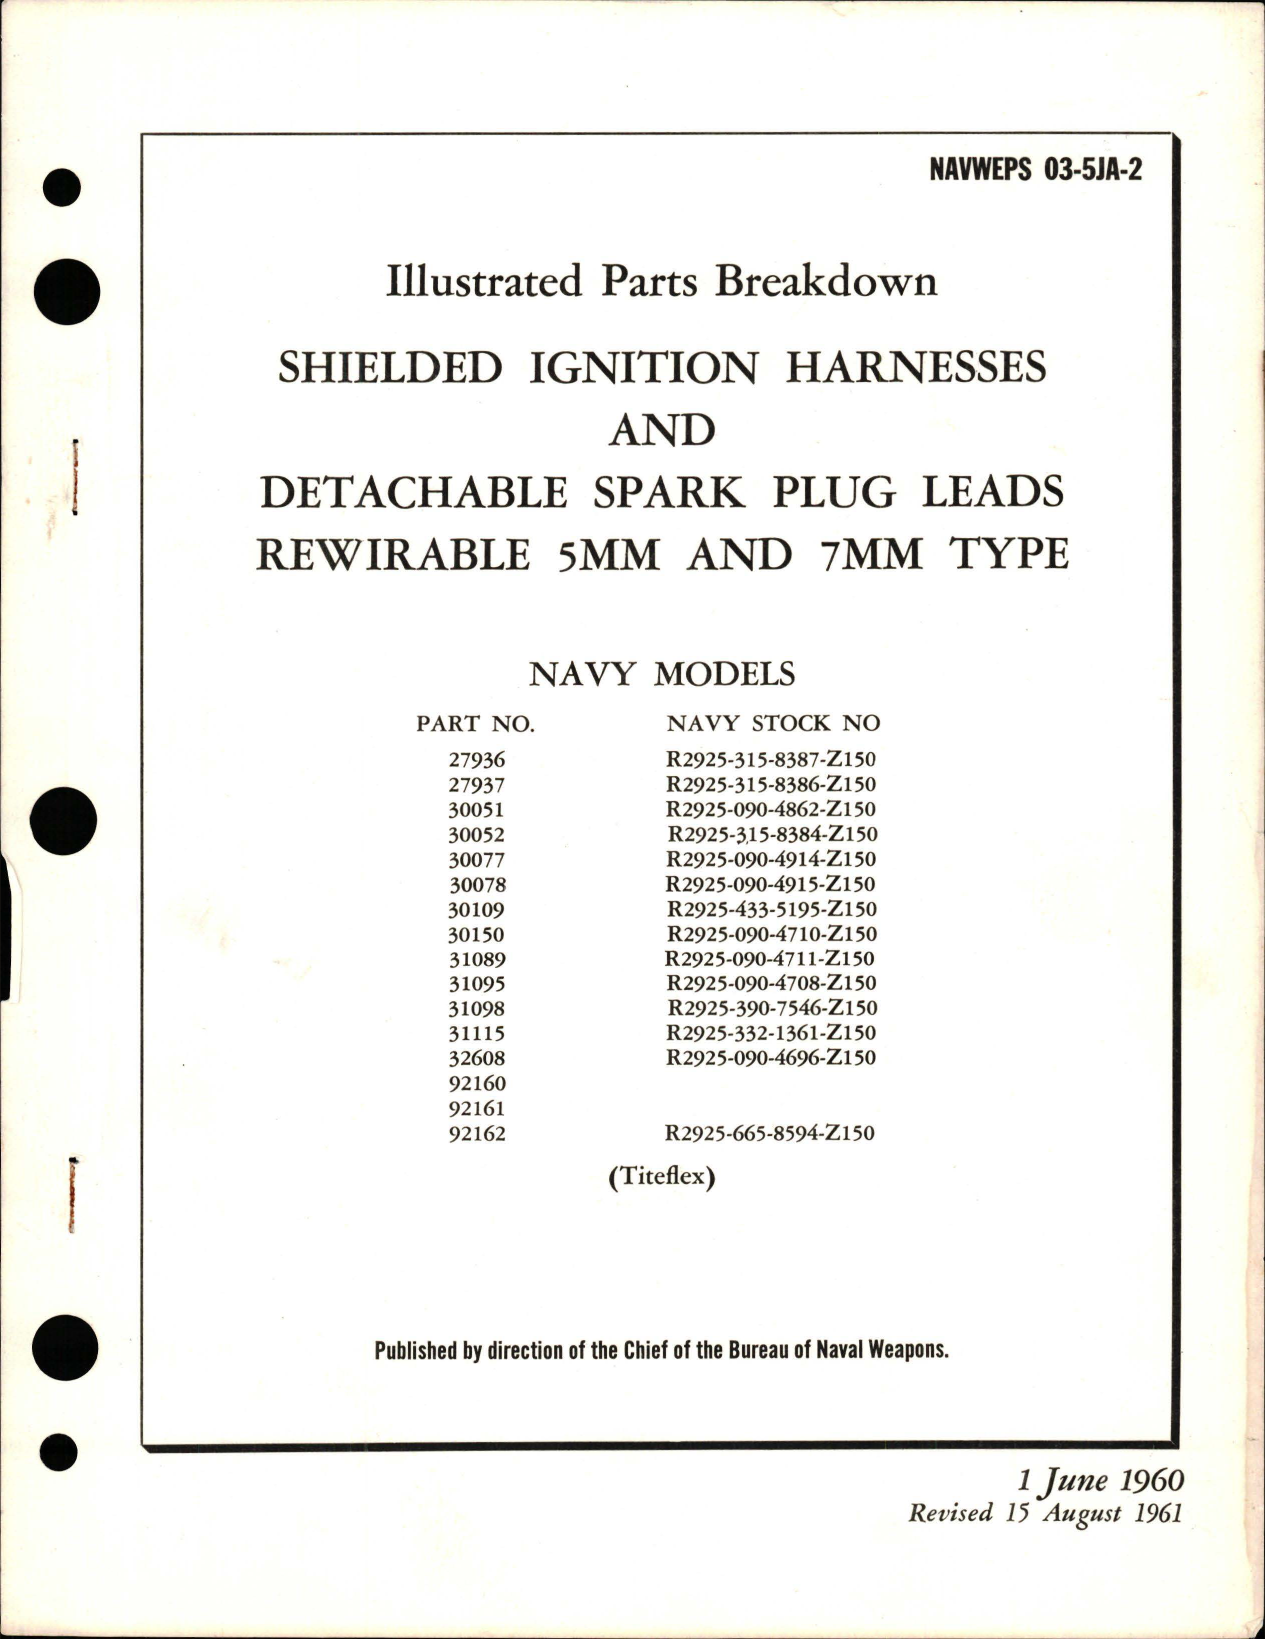 Sample page 1 from AirCorps Library document: Illustrated Parts Breakdown for Shielded Ignition Harnesses and Detachable Spark Plug Leads - Rewirable - 5MM & 7MM Type